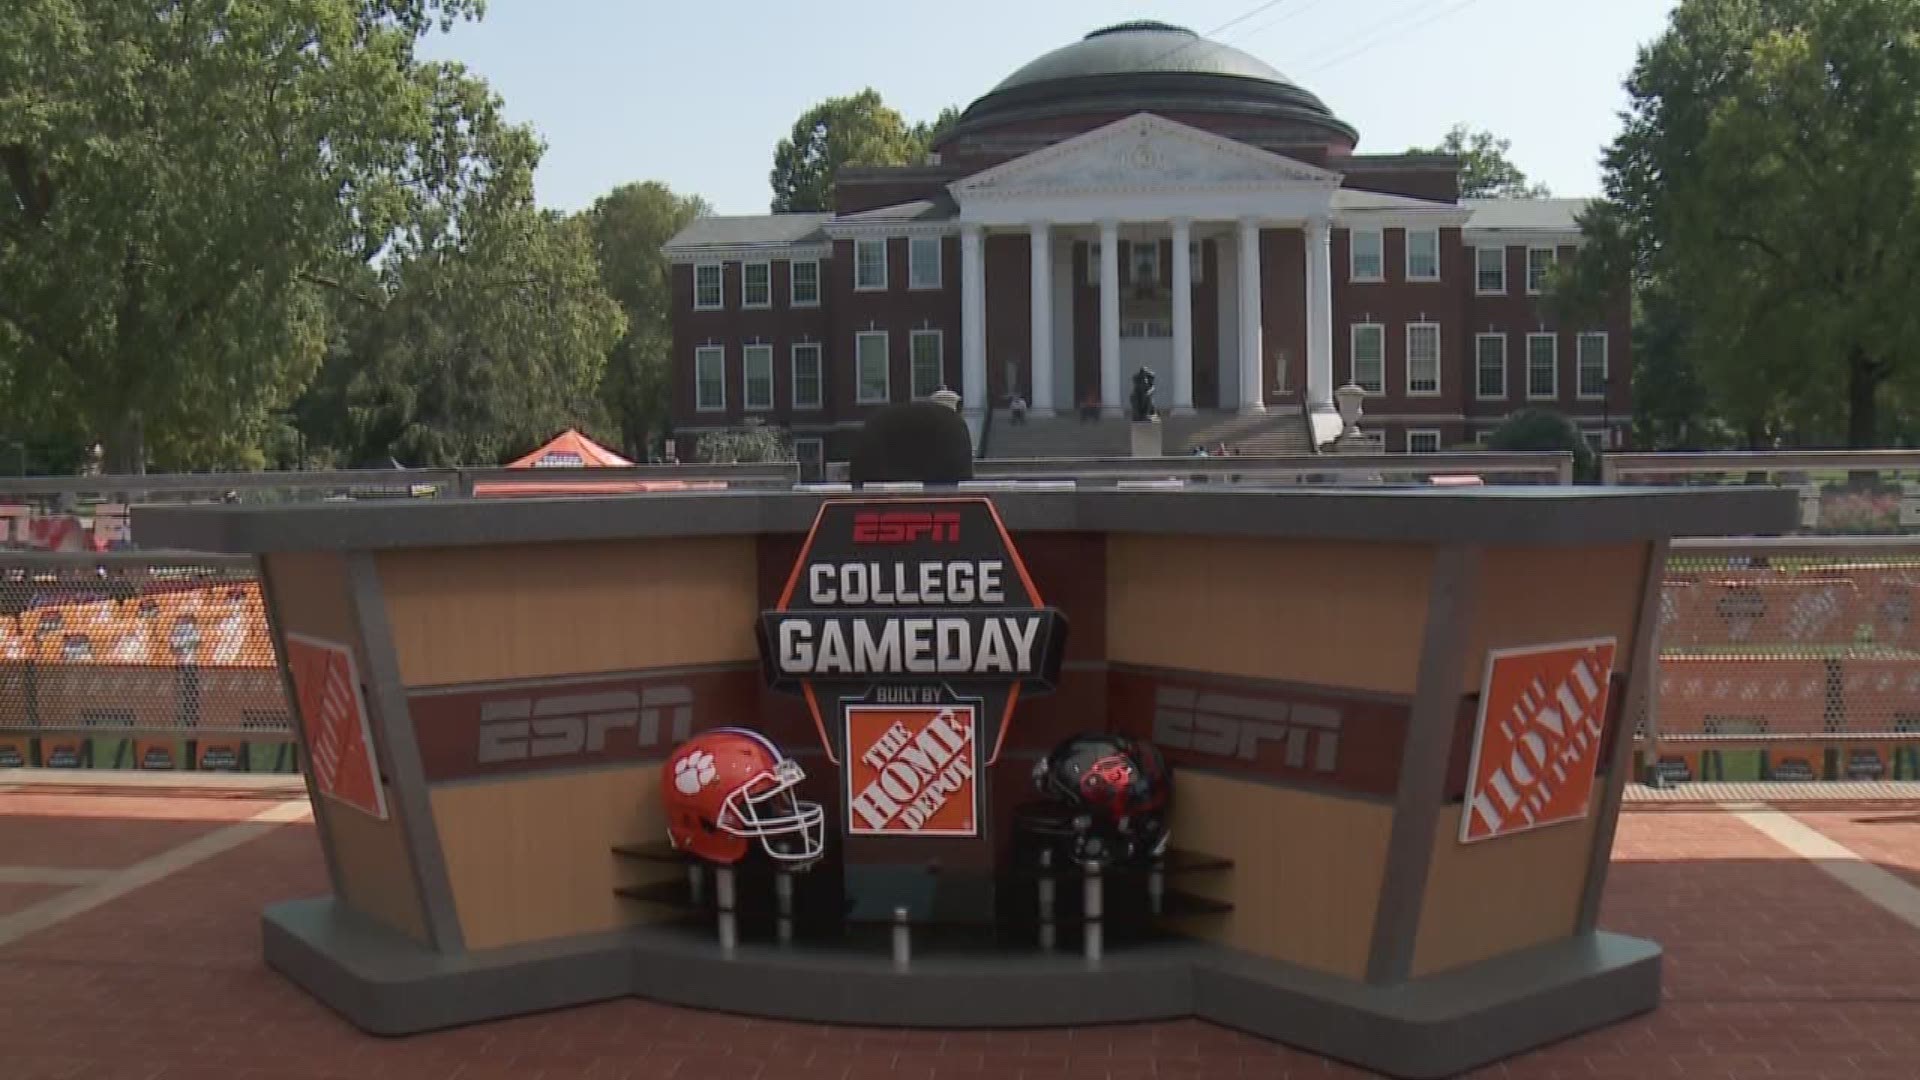 ESPN College GameDay set to air from UofL campus Saturday morning